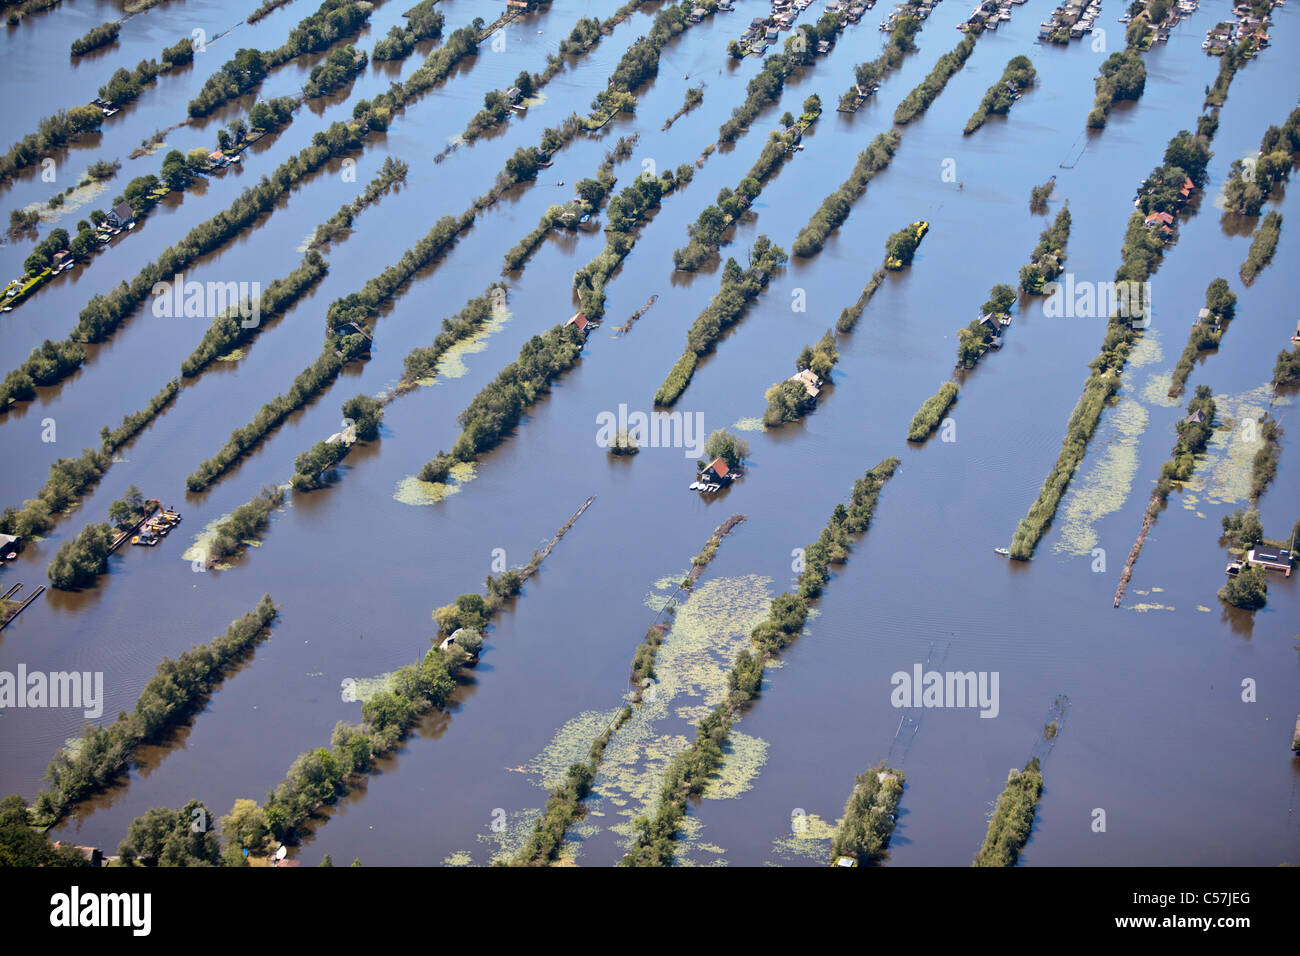 The Netherlands, Breukelen, Dugged out land in marsh. Aquatic sports. Housing holiday houses. Aerial. Stock Photo